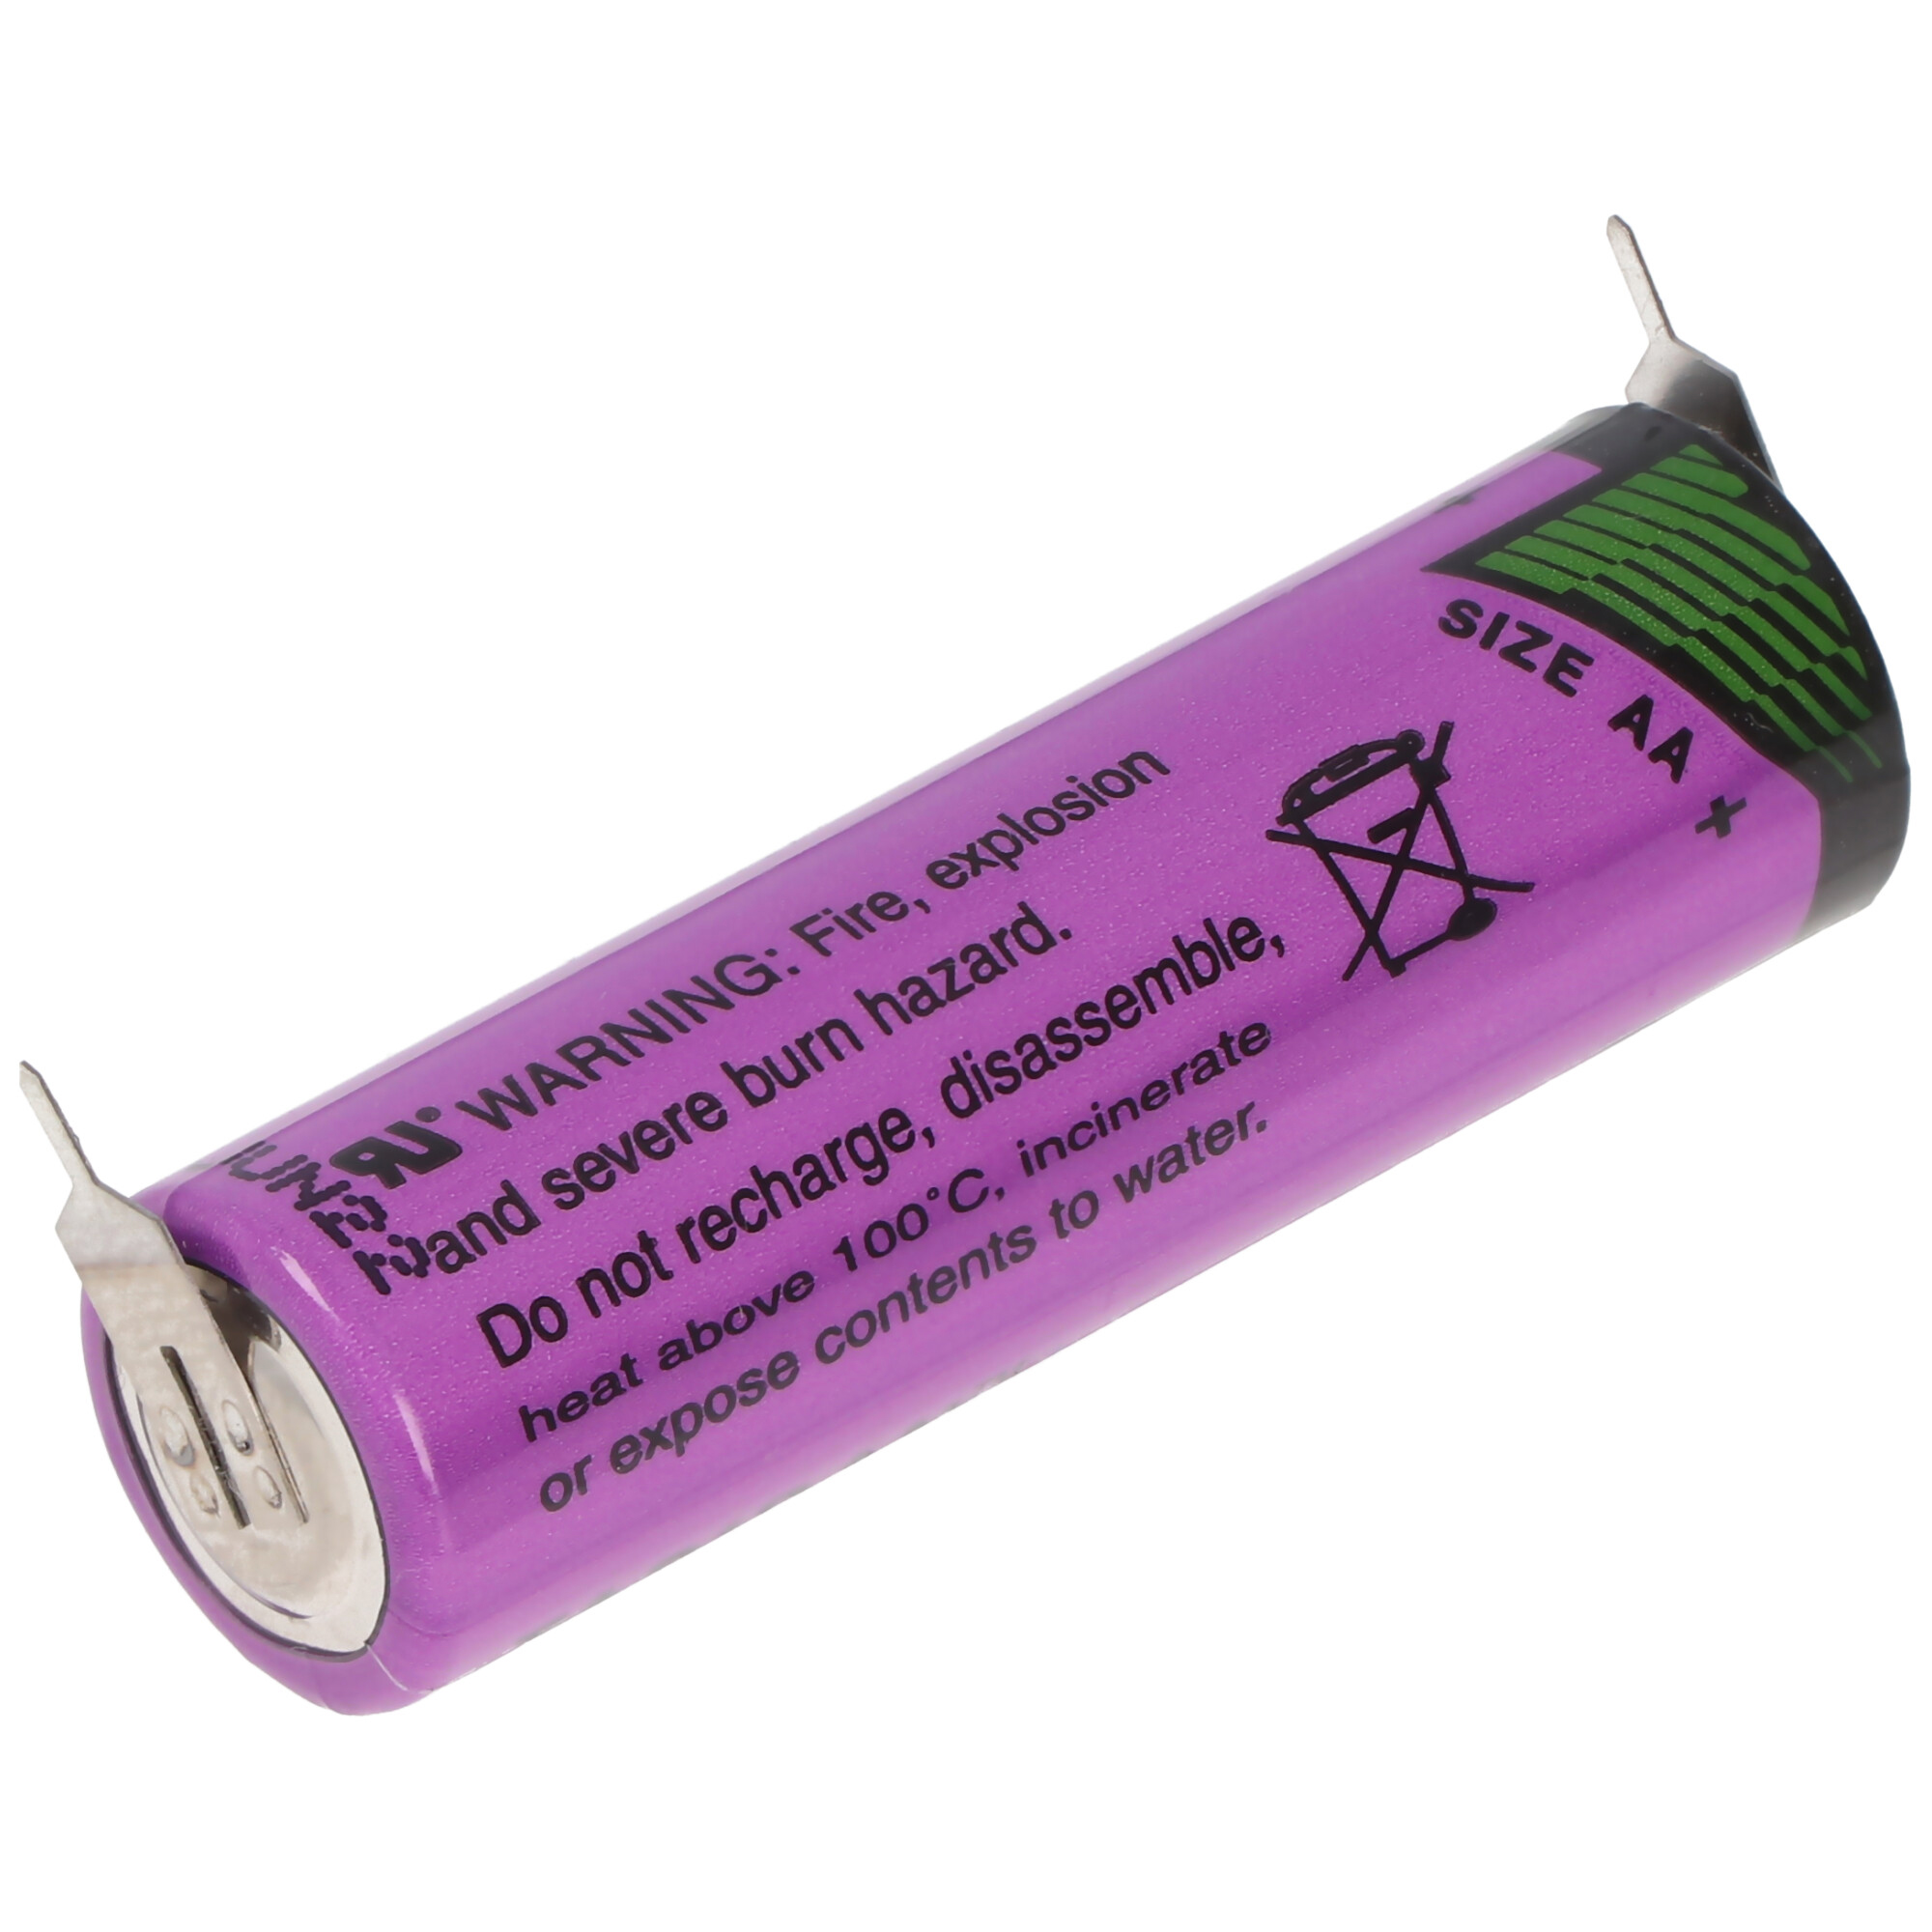 5x SAFT LS14500 Size AA 3.6V 2600mAh Primary Lithium Cell for RFID